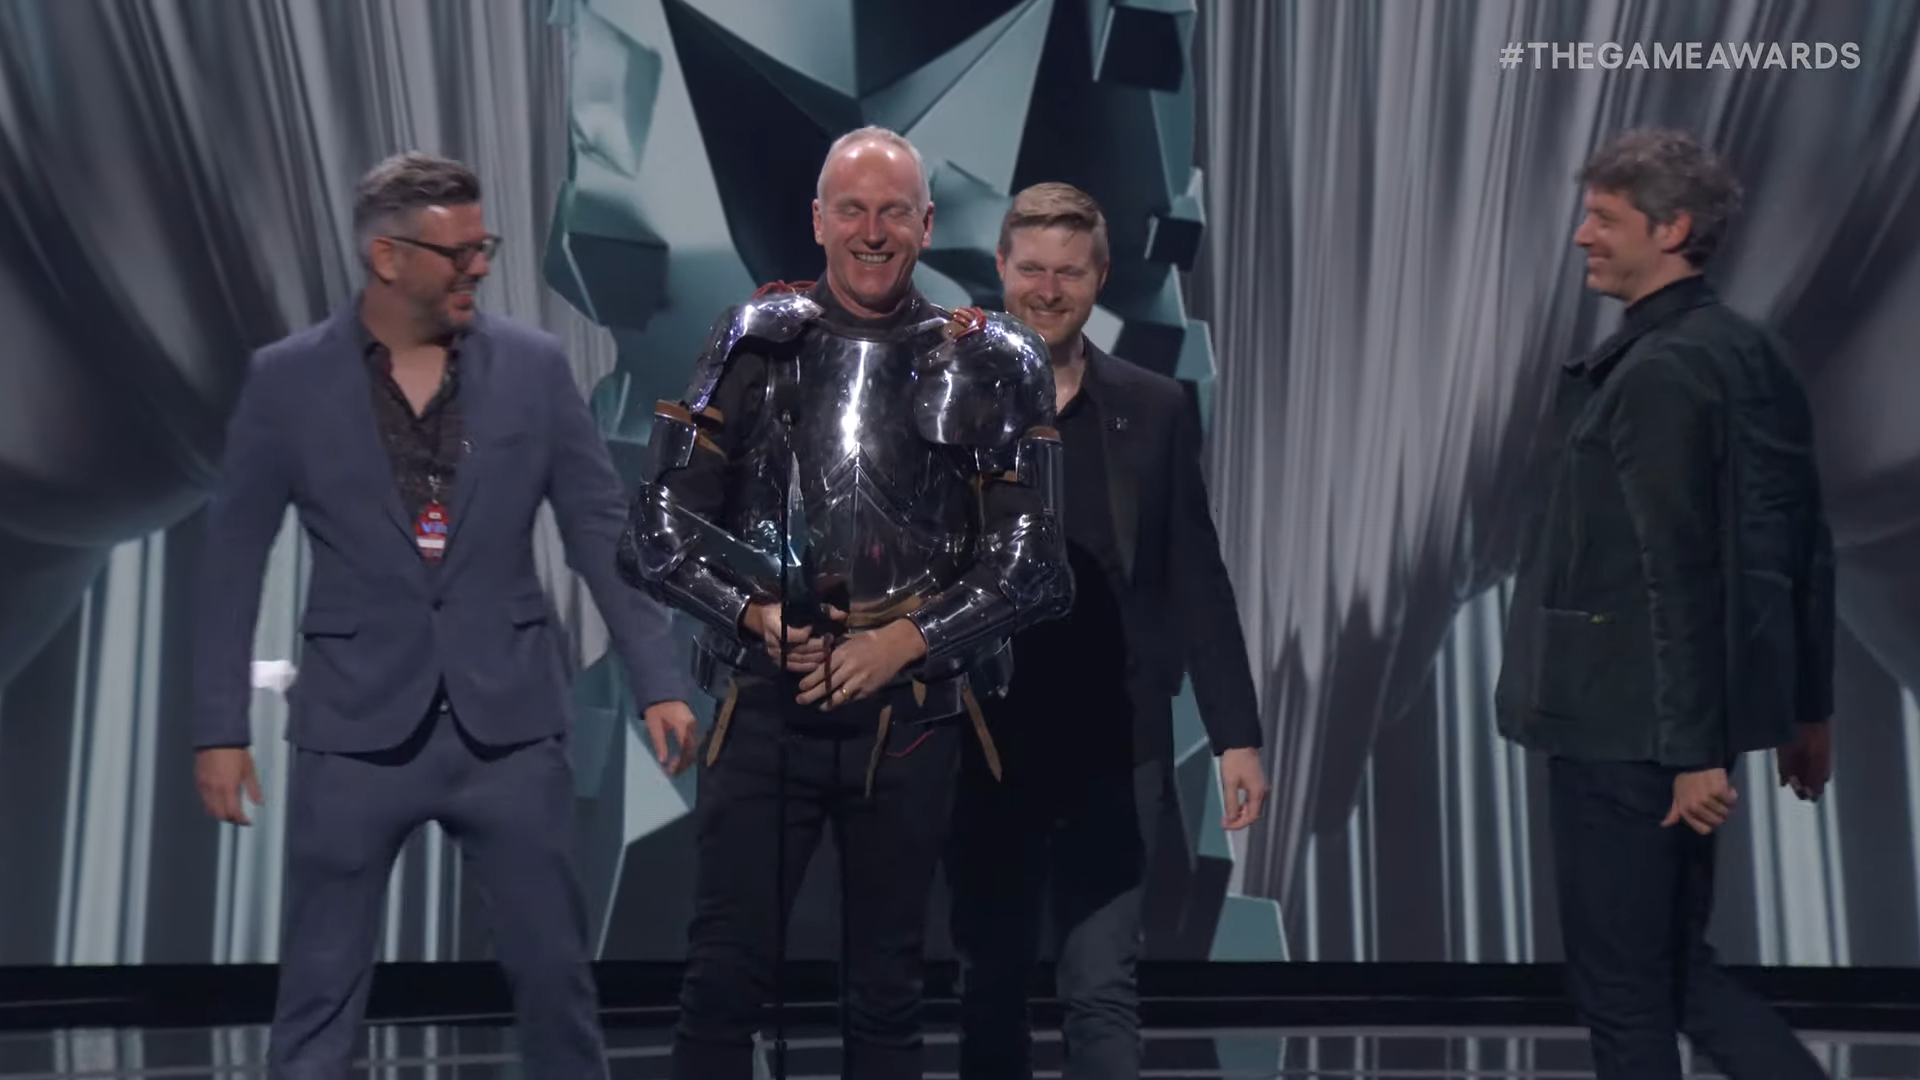 The Game Awards — where to watch, start time, and what to expect